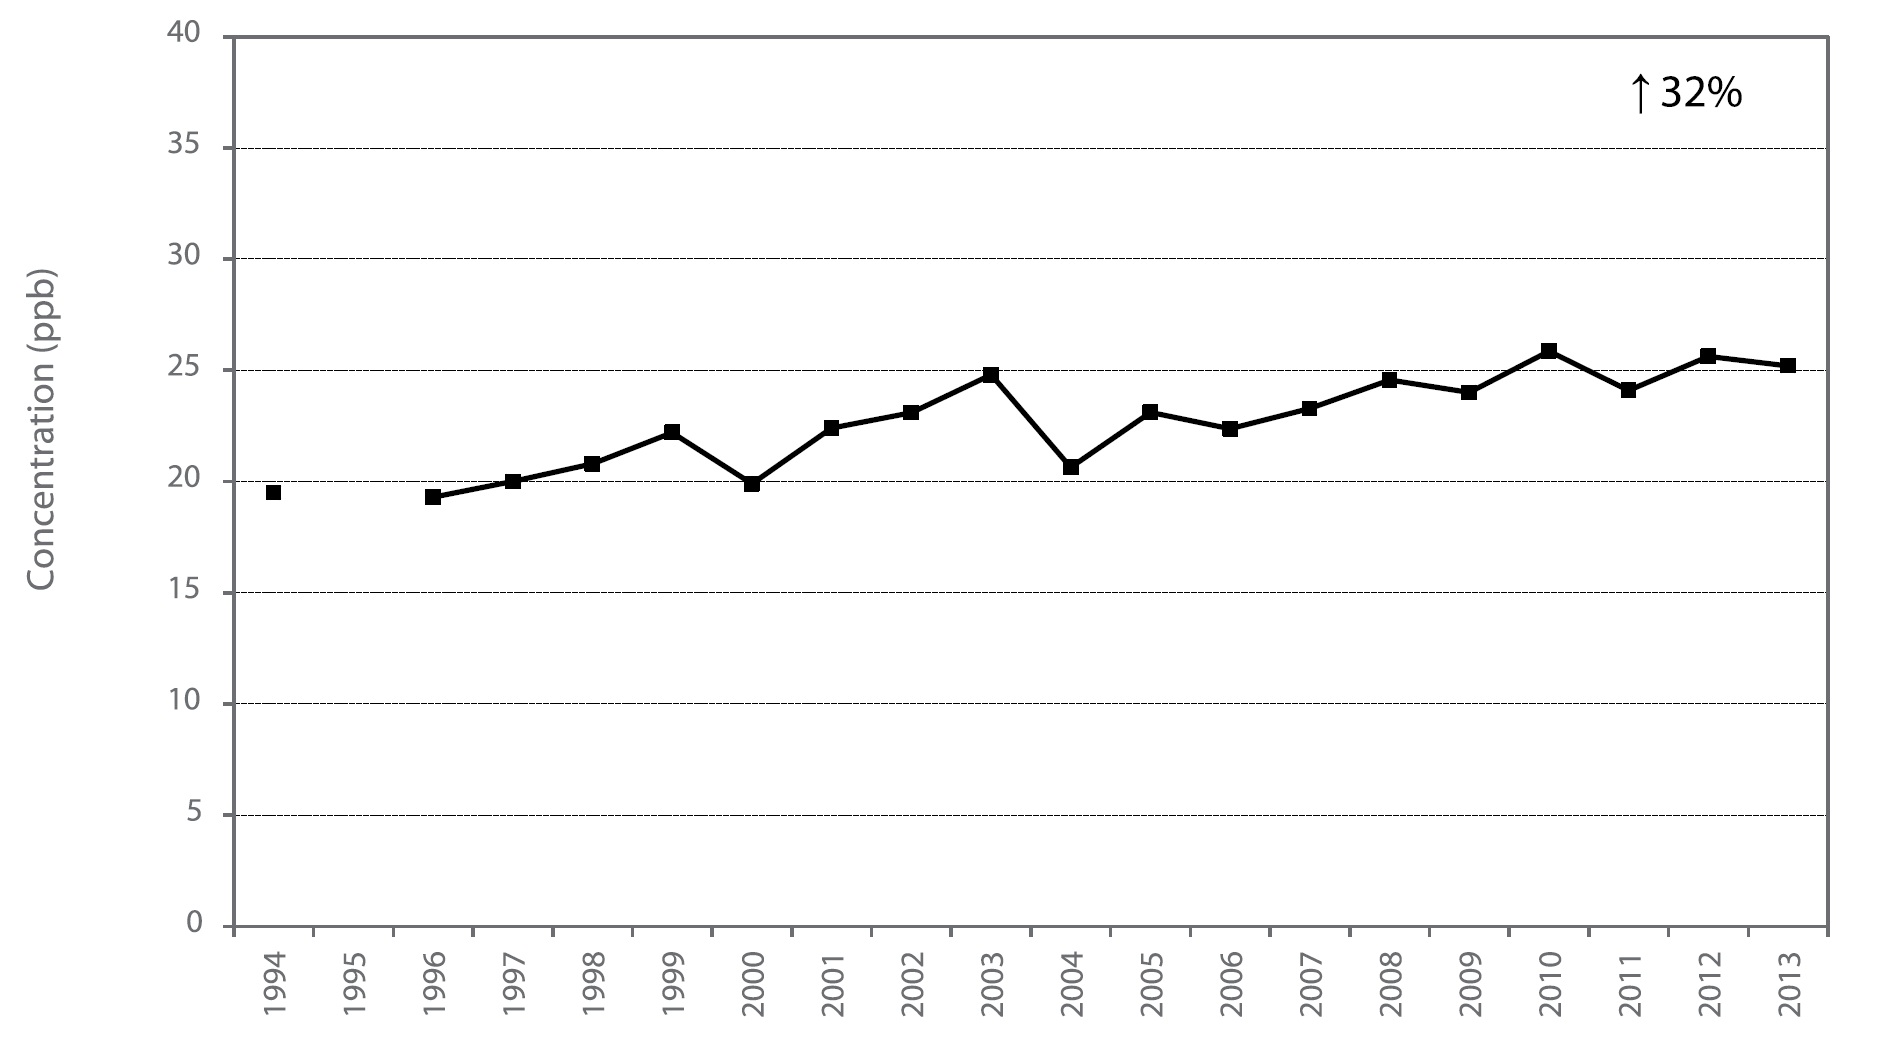 Figure A19 is a line chart displaying the ozone annual mean at Mississauga from 1994 to 2013. Over this 20-year period, ozone increased 32%.